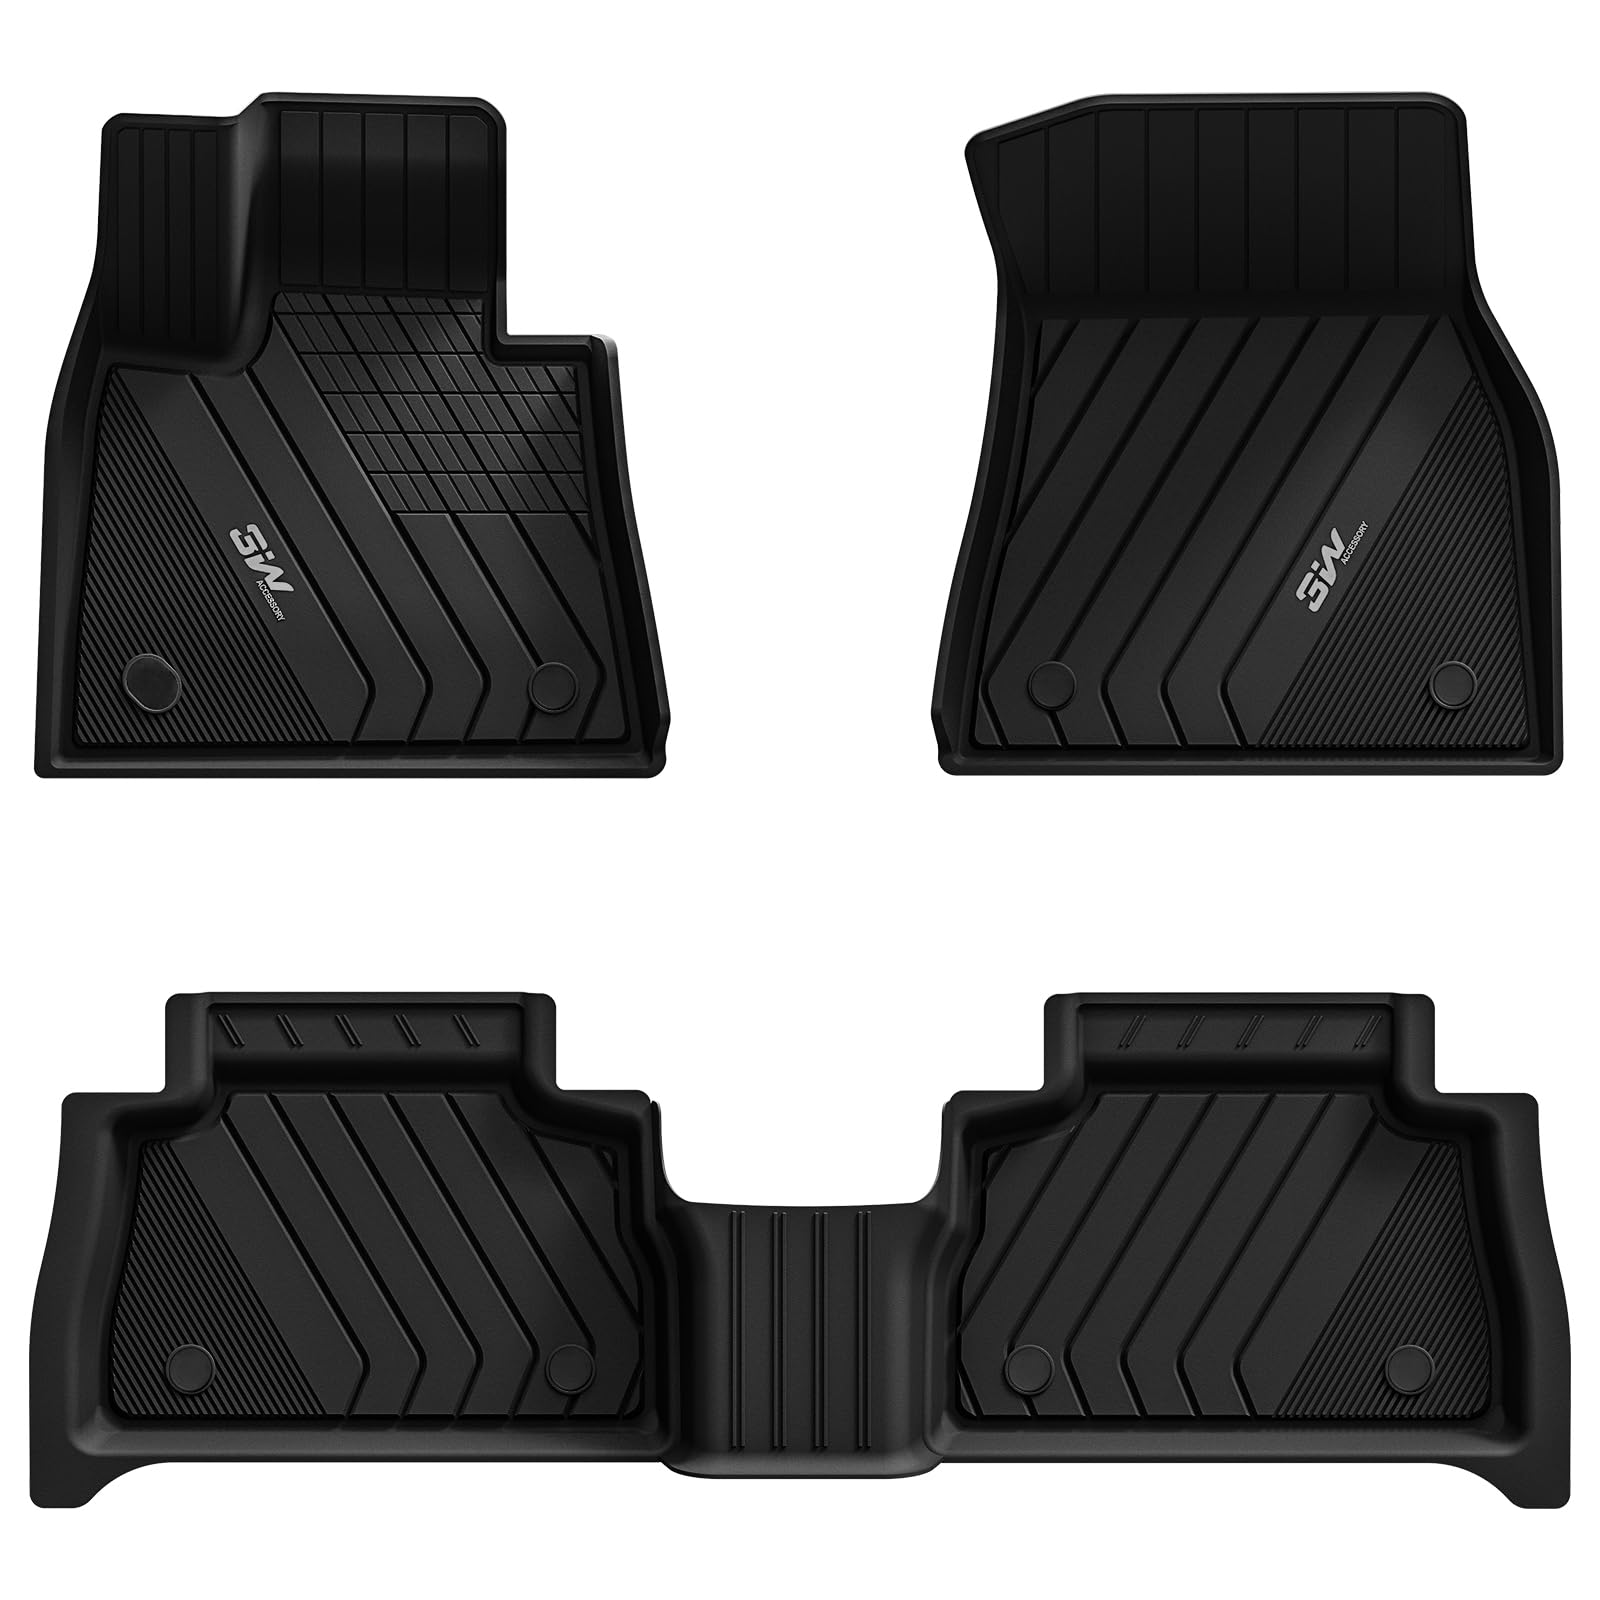 3W BMW X6 2020-2024 M/M50i/sDrive40i/xDrive40i G06  Custom Floor Mats TPE Material & All-Weather Protection Vehicles & Parts 3W 2020-2024 X6 2020-2024 1st&2nd Row Mats